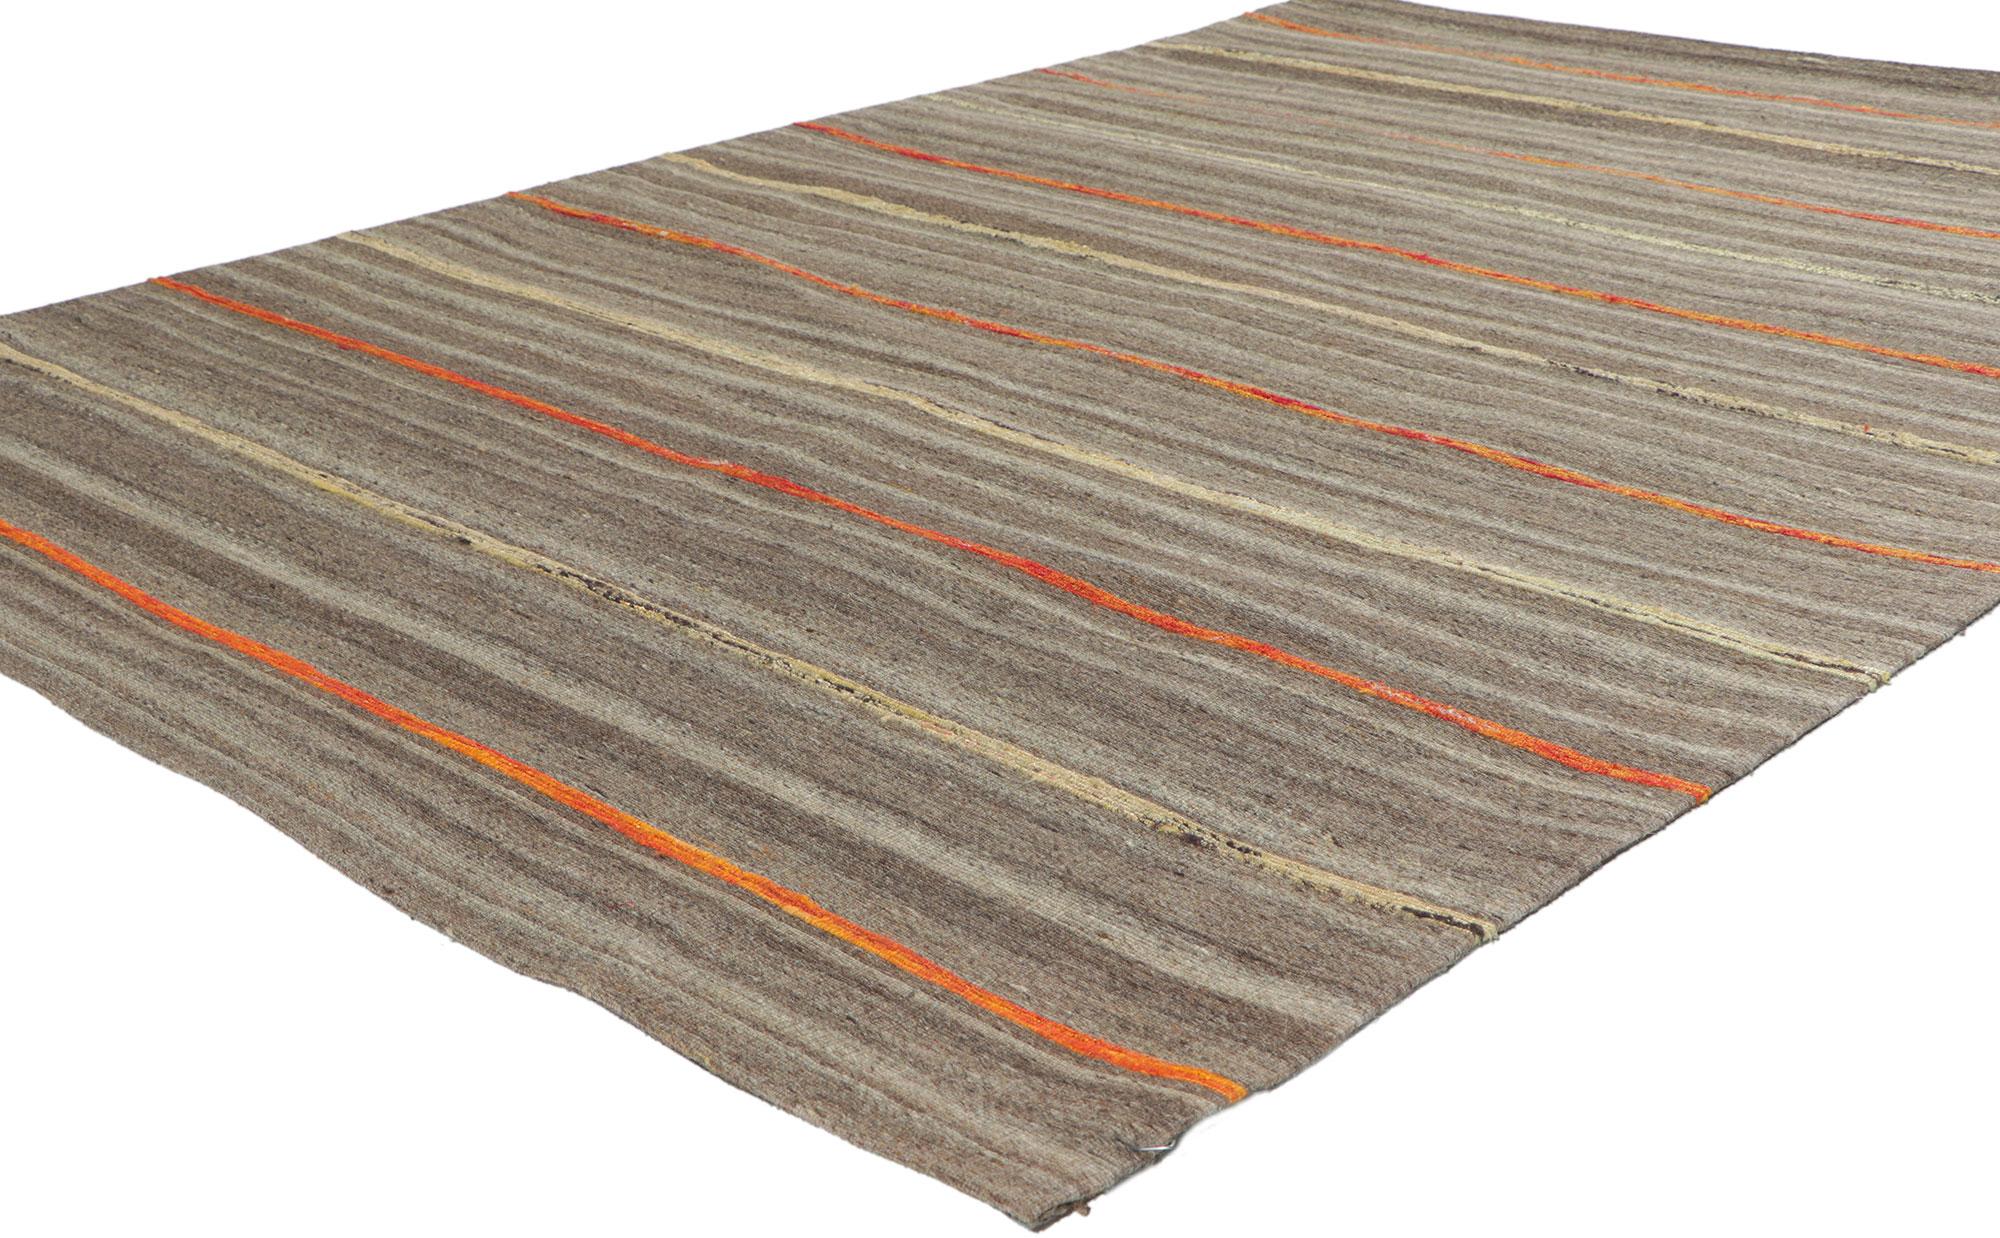 30090 Indian Striped Kilim Rug with Vintage Style 04'08 x 06'08.
With its subtle graphic appeal, incredible detail and texture, this vintage style Indian rug is a captivating vision of woven beauty. The striated pattern and modern colorway woven